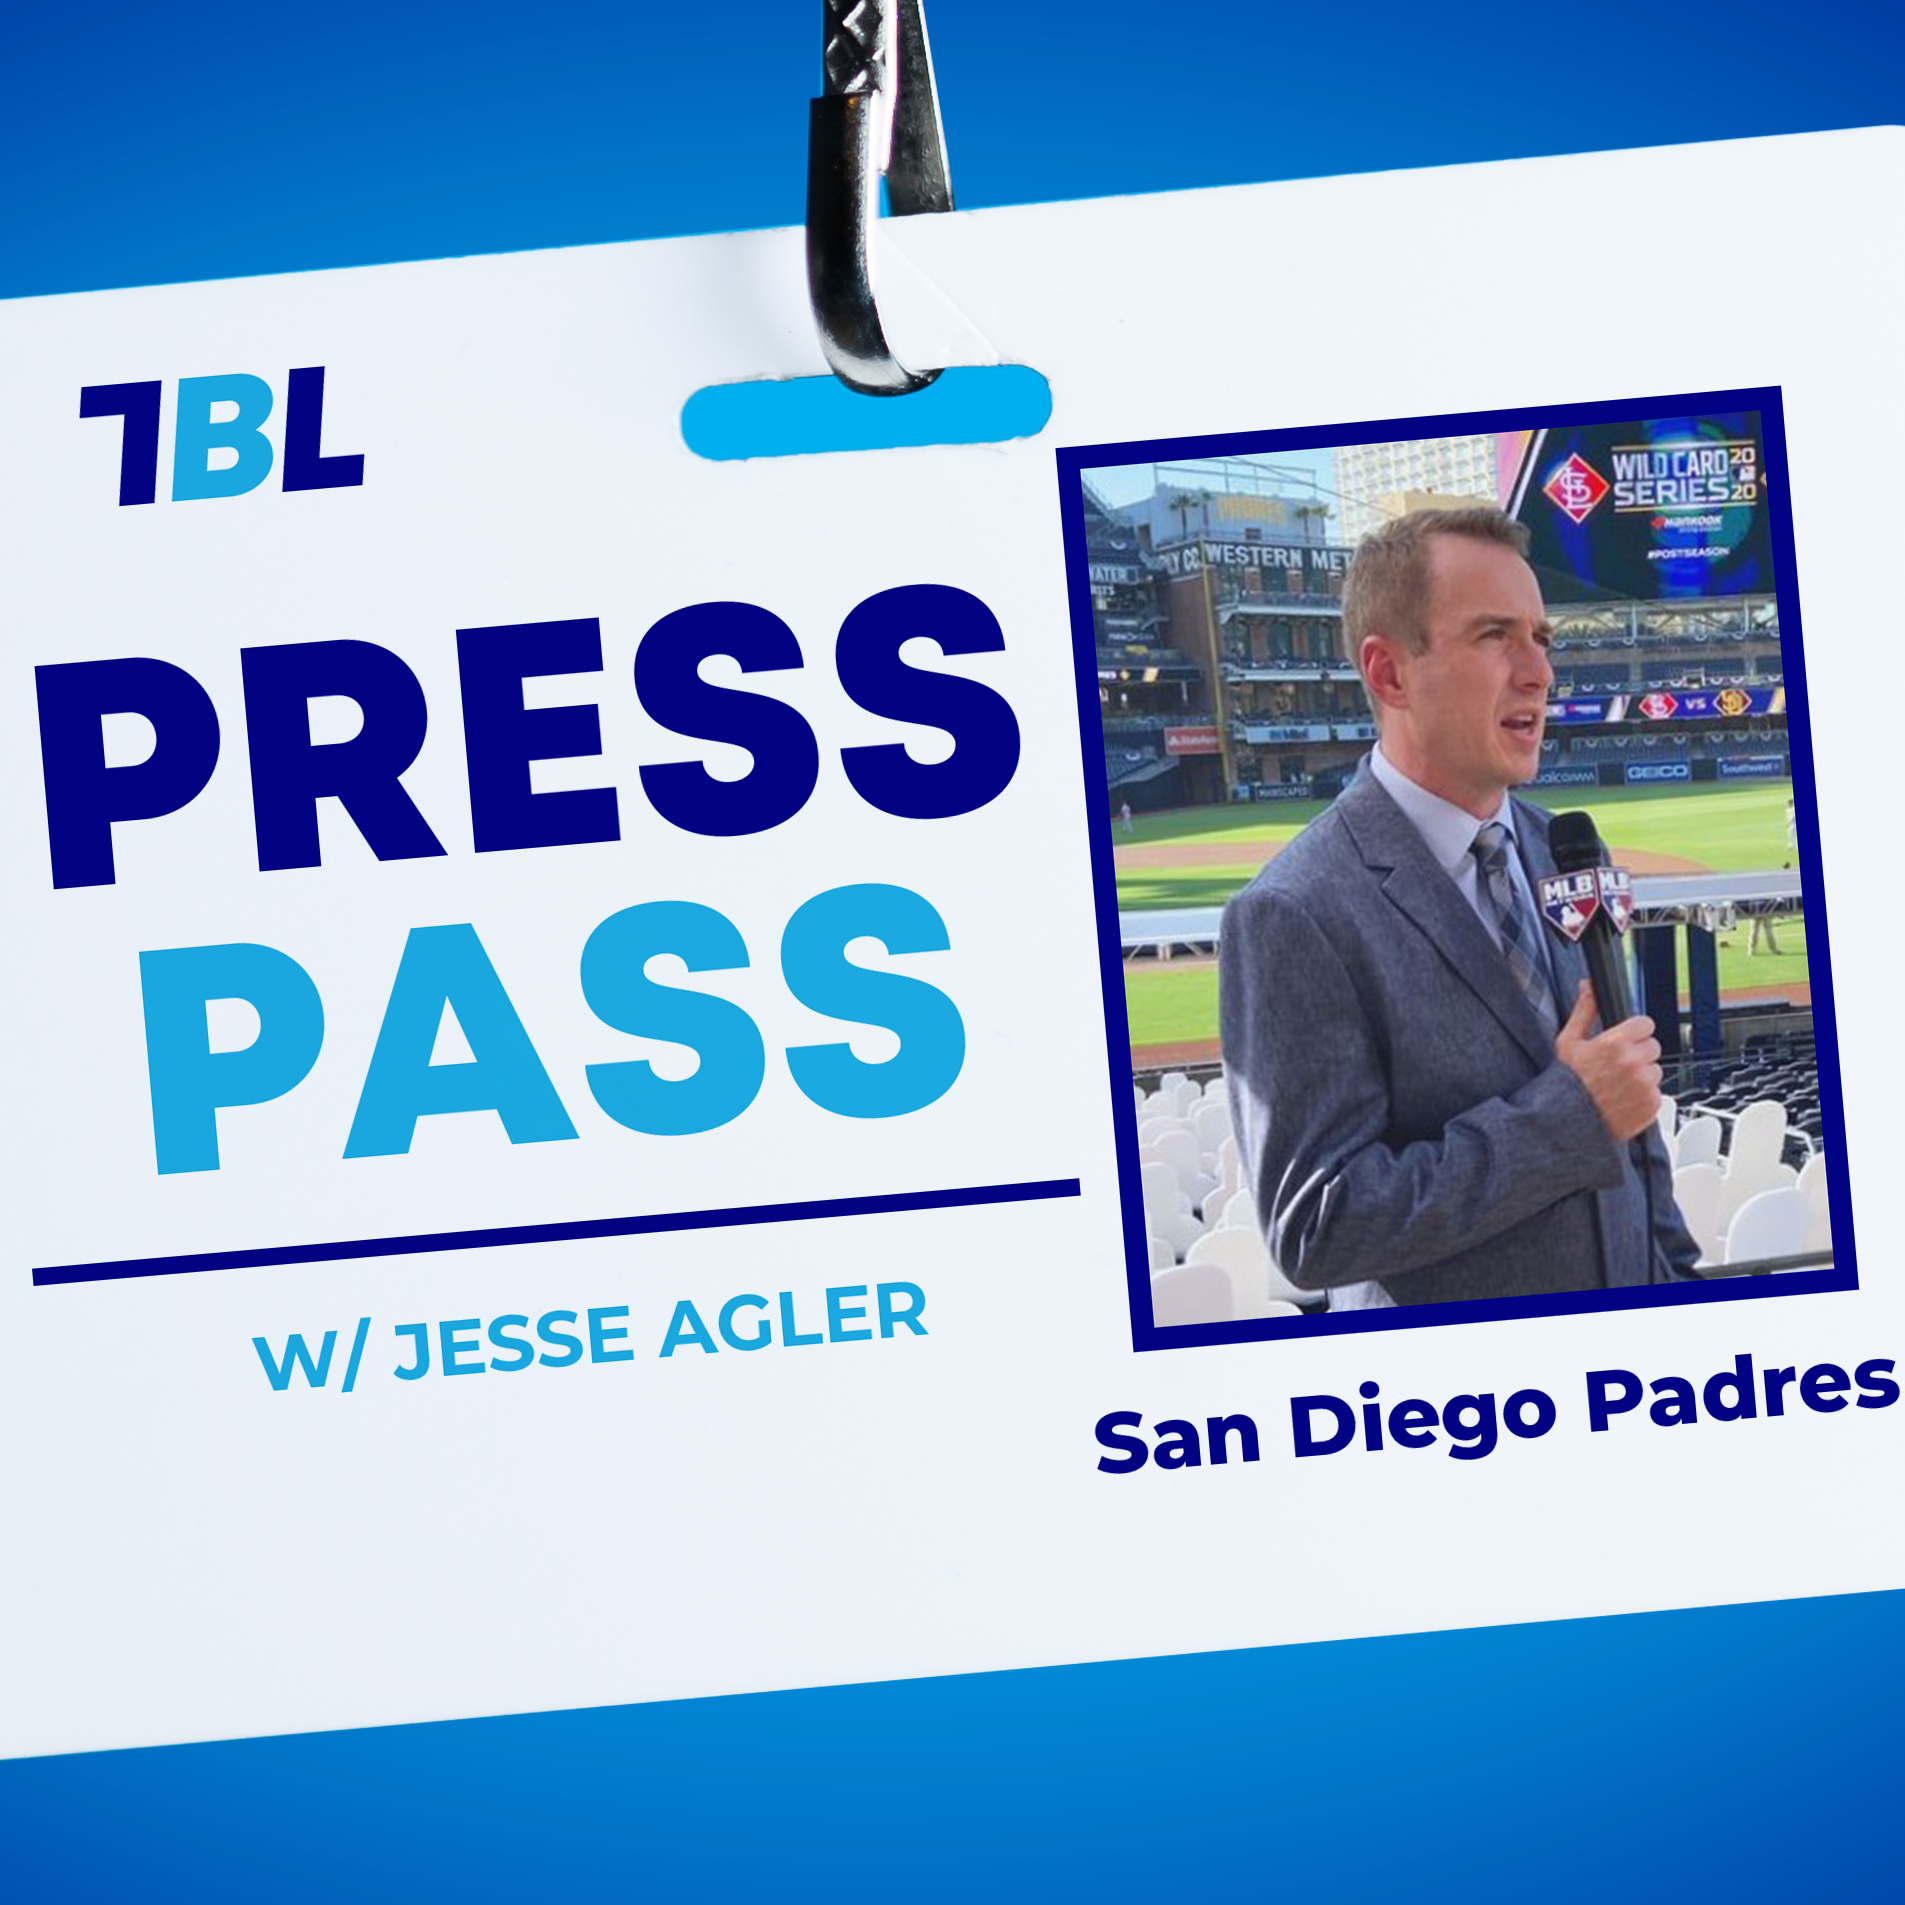 Jesse Agler Discusses His Career, the Padres and Getting to watch Fernando Tatis Jr. Every Day